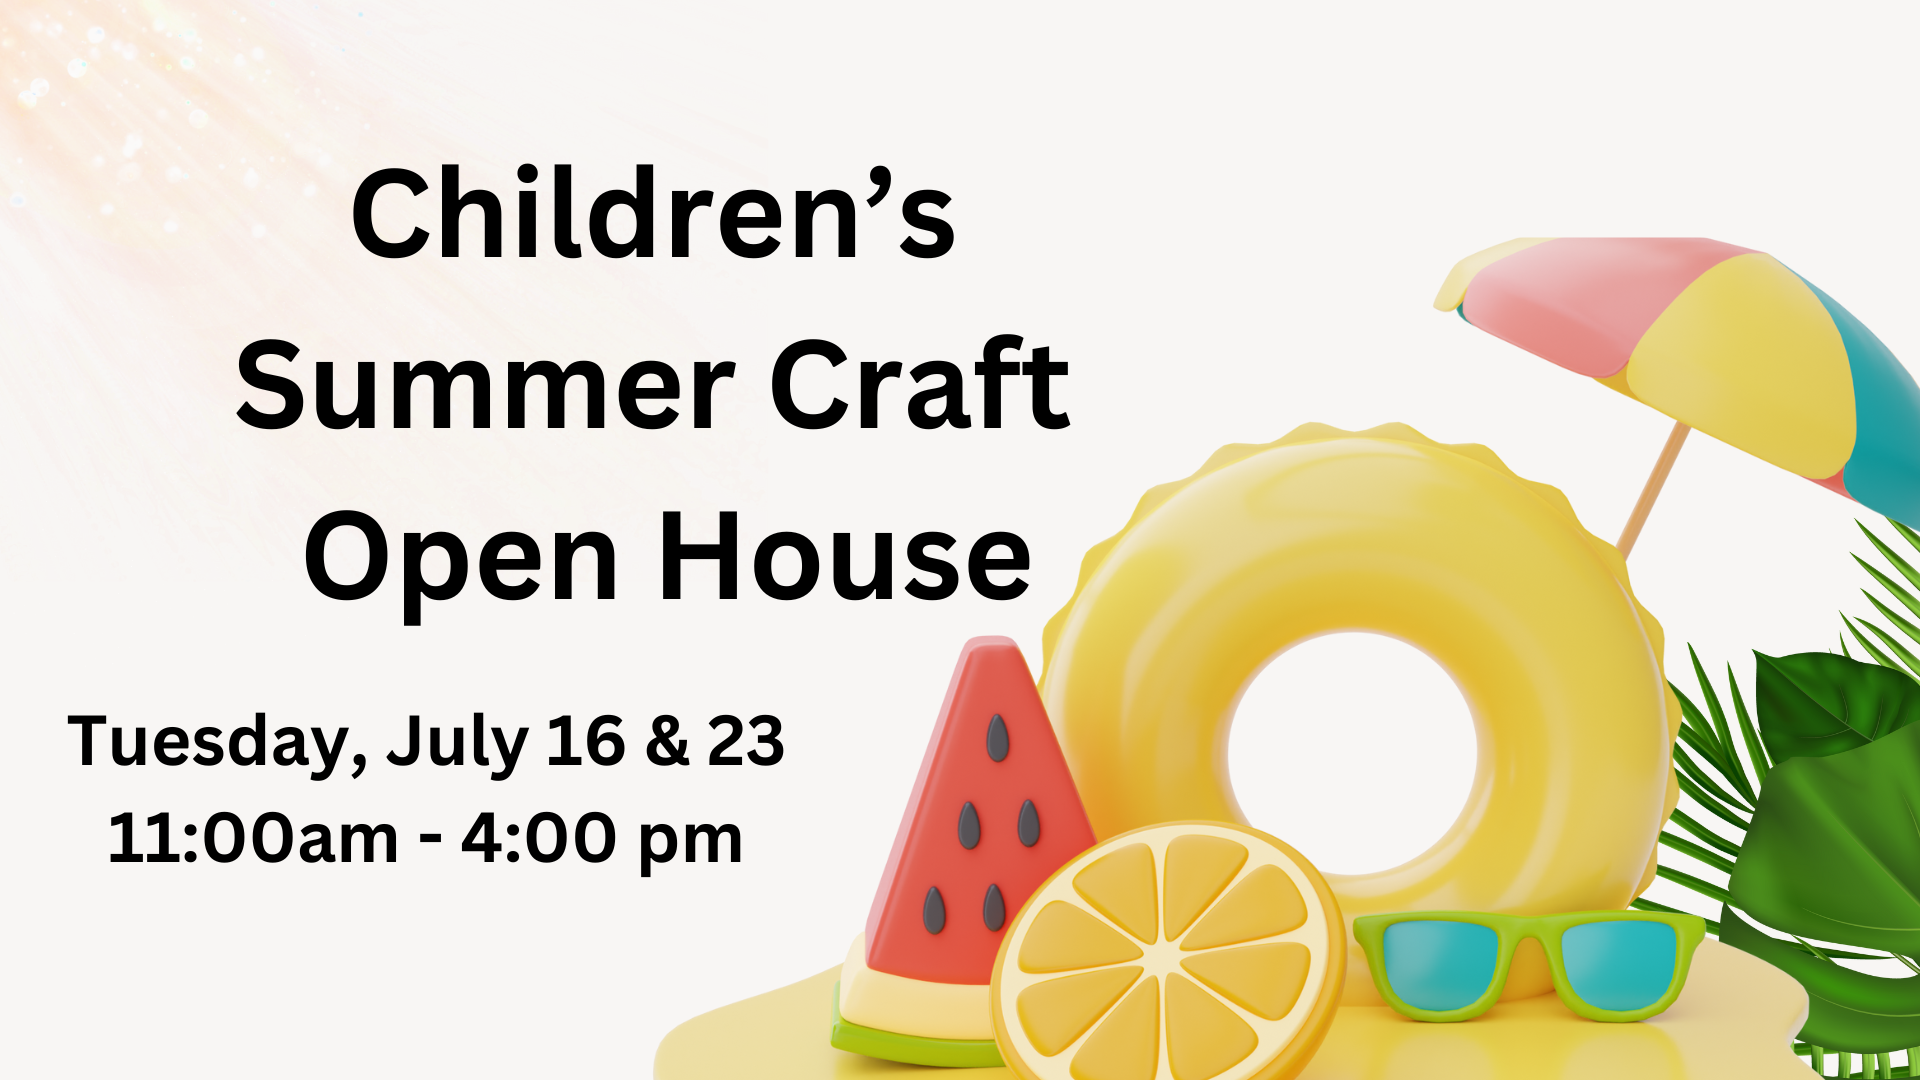 Children's Summer Craft Open House July 16 and 23 at 1:00 to 4:00 pm